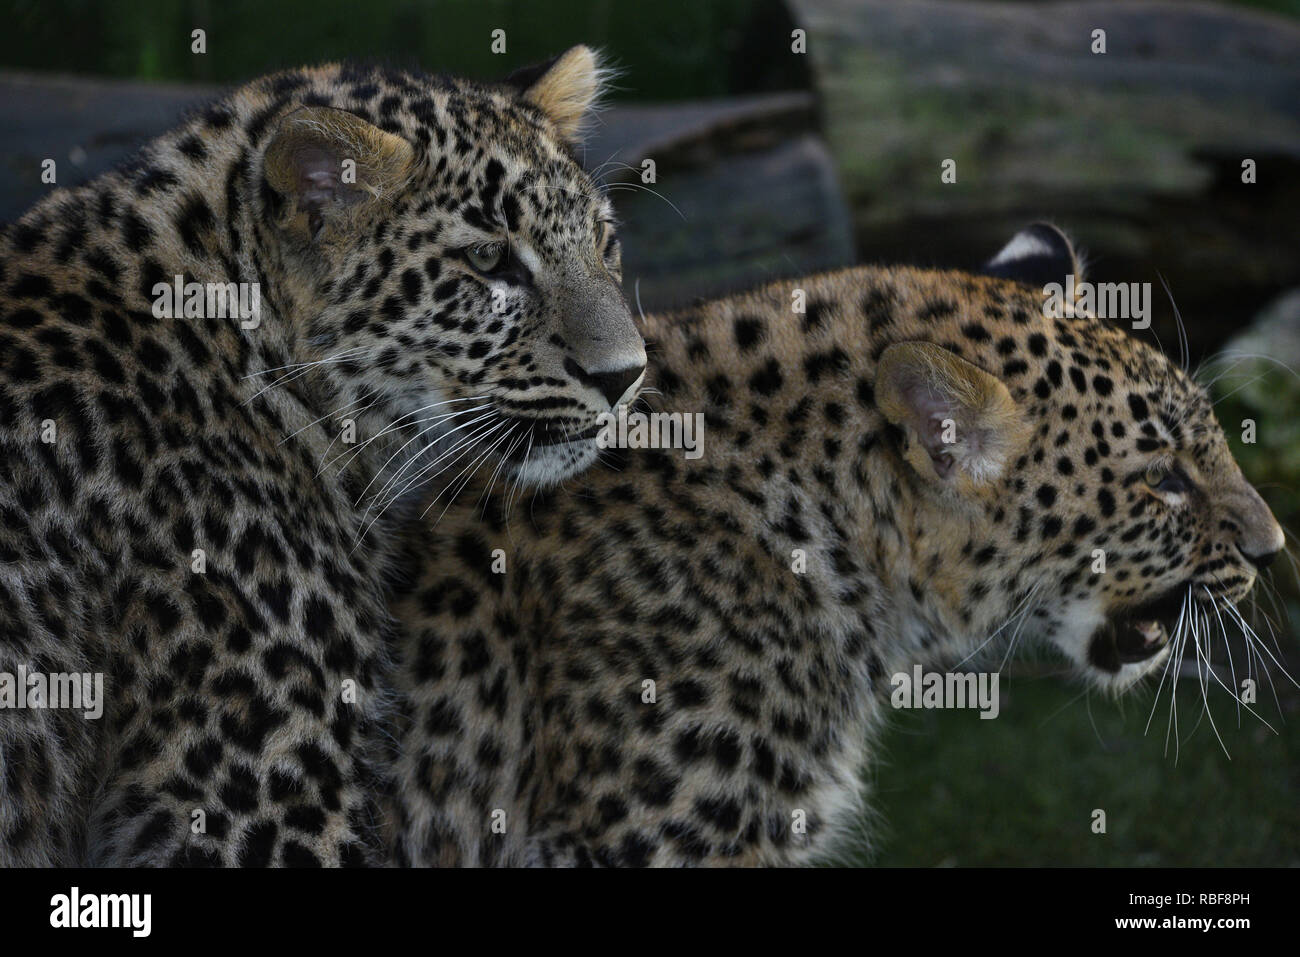 Madrid, Spain. 9th Jan, 2019. The babies Persian leopards seen in their enclosure at Madrid zoo. They were born on last April, 2018, after of 3 months of gestation, weighing about 0.5 kilograms. Credit: John Milner/SOPA Images/ZUMA Wire/Alamy Live News Stock Photo